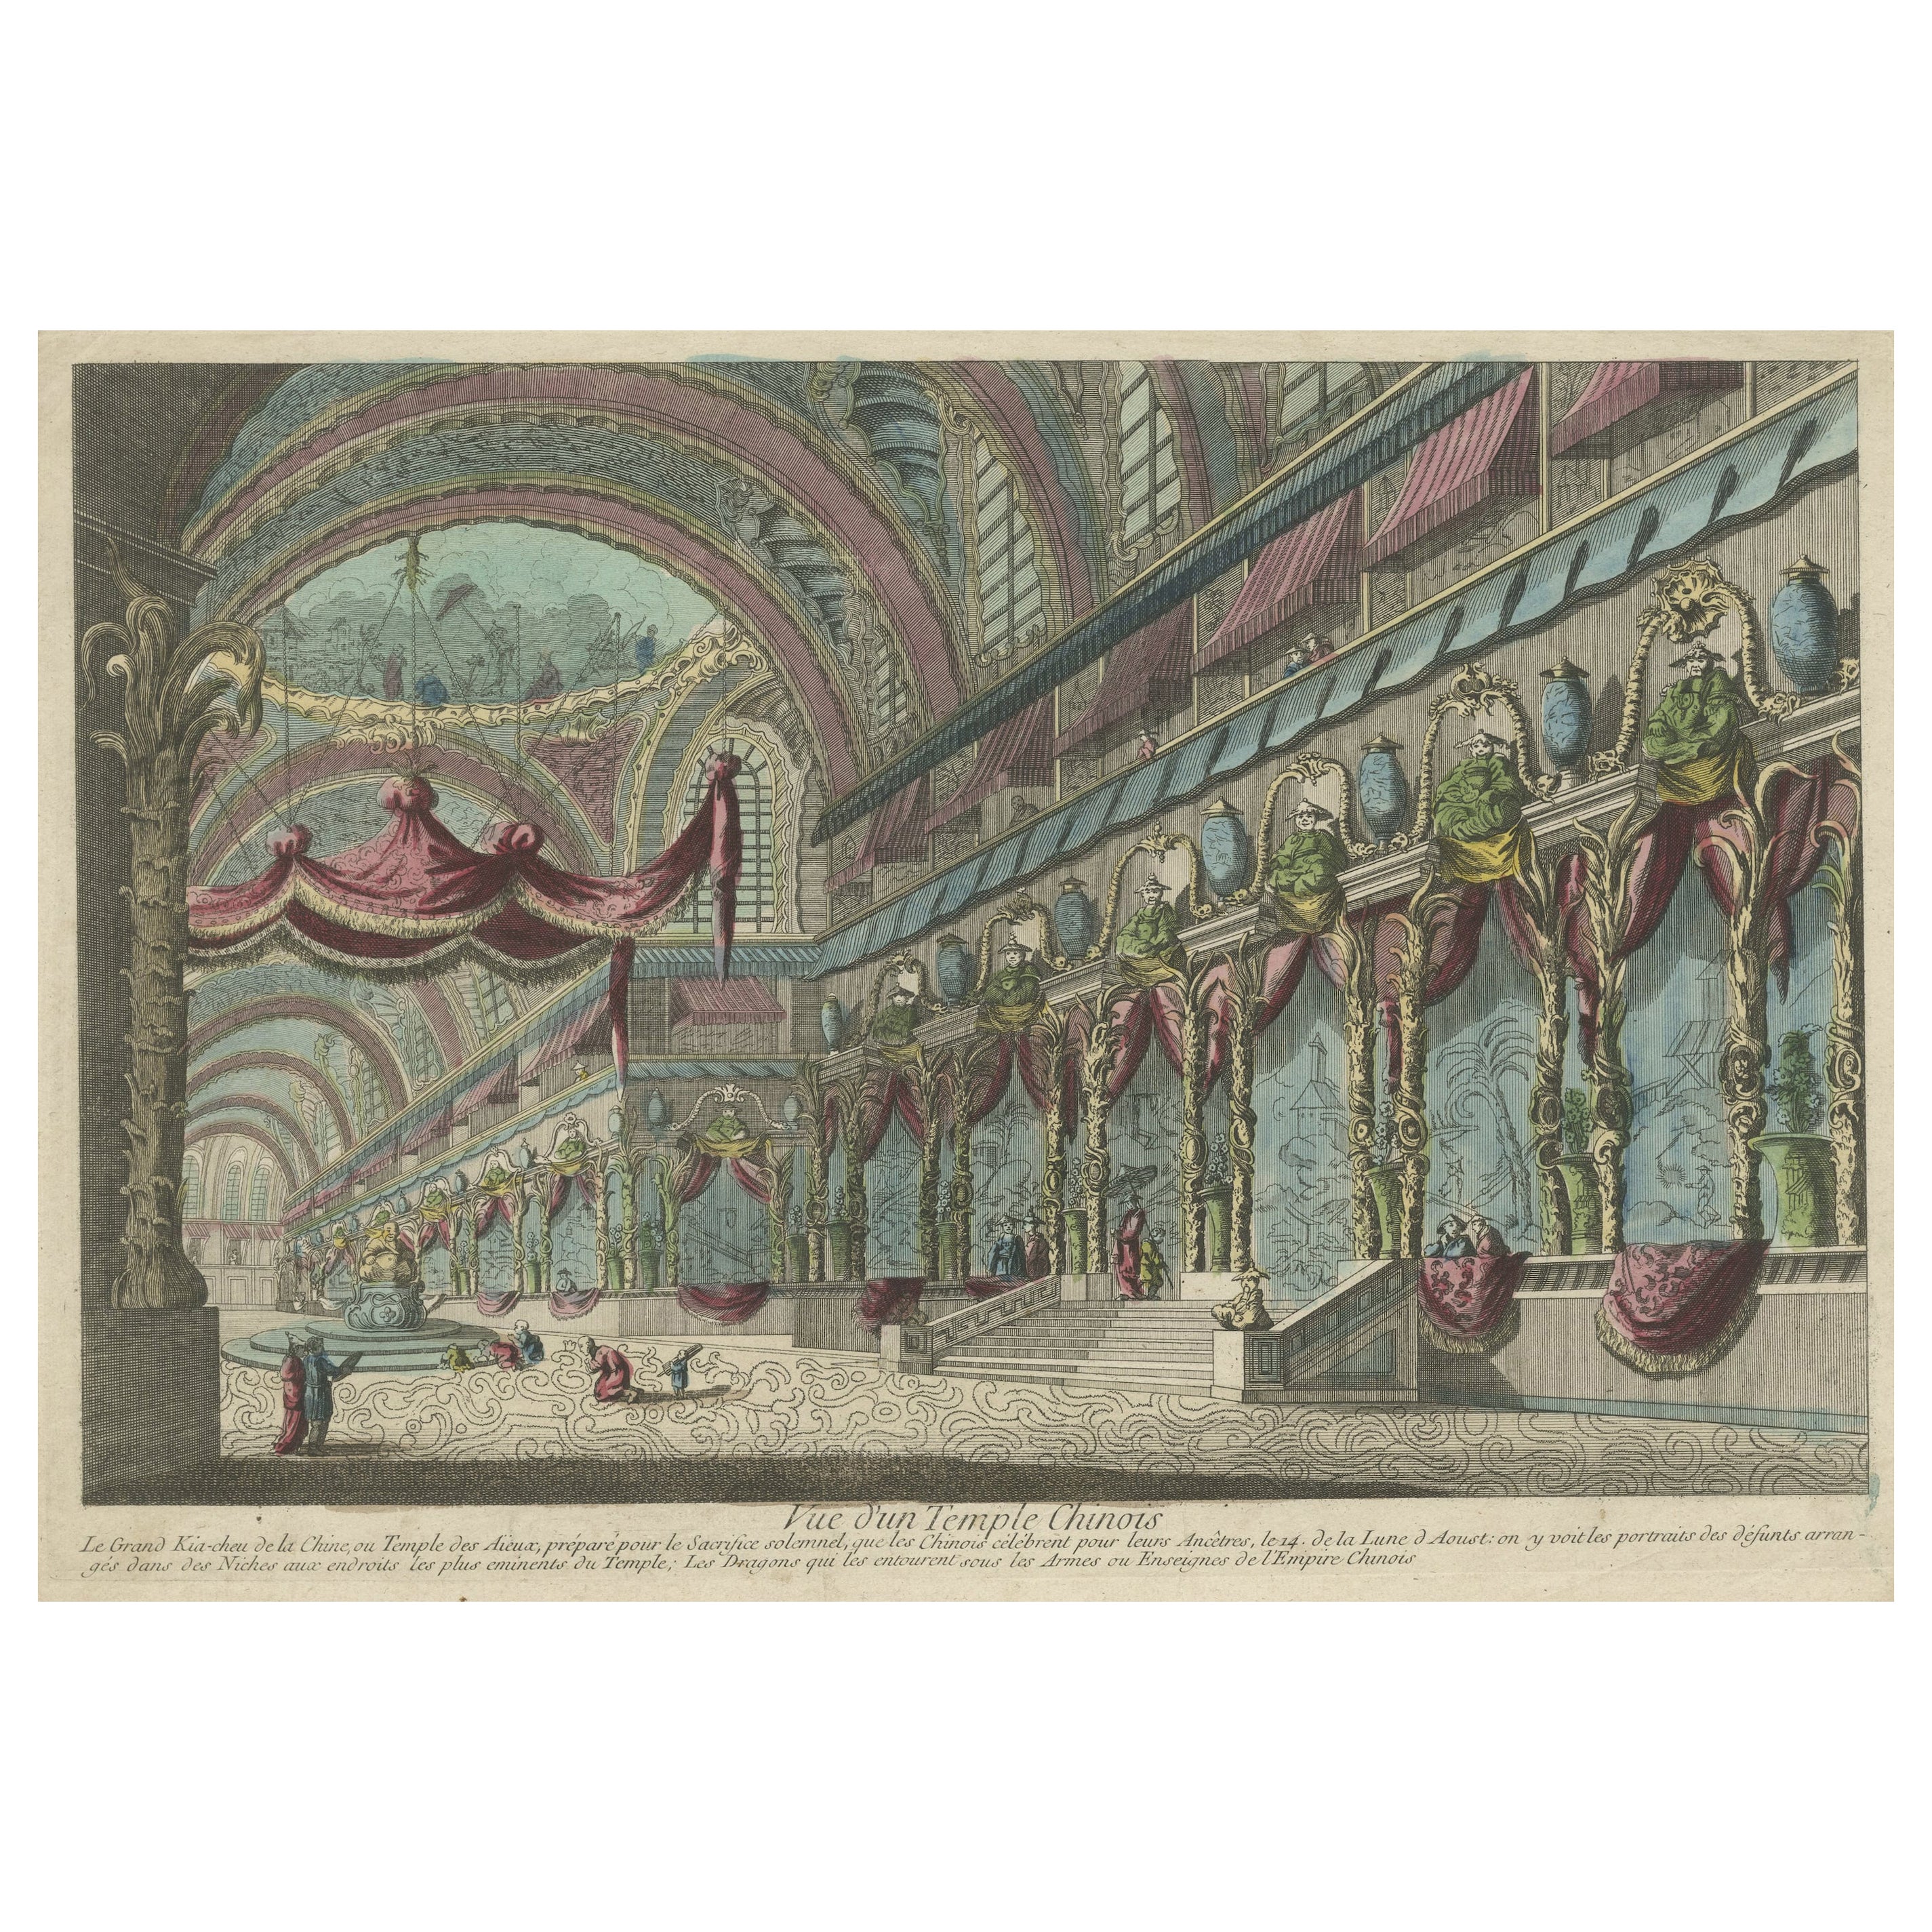 Handcolored Copperplate Engraving Showing a Perspective View of a Chinese Temple